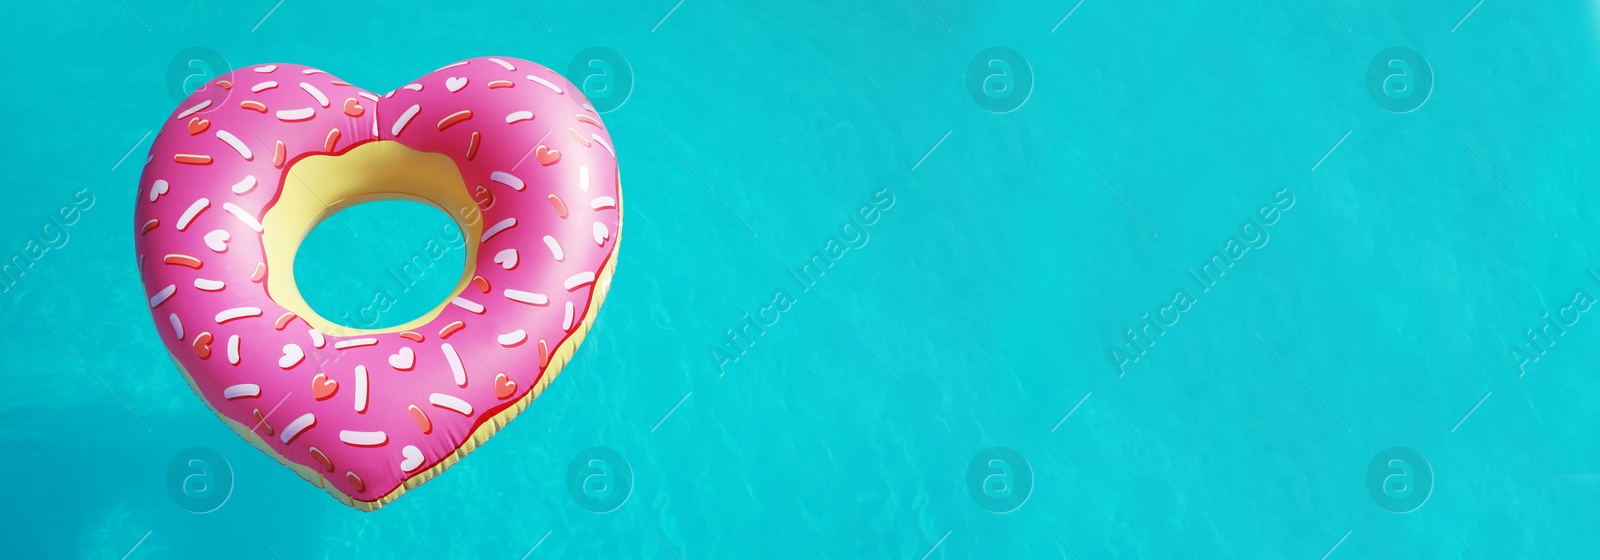 Image of Heart shaped inflatable ring floating in swimming pool on sunny day, above view with space for text. Banner design